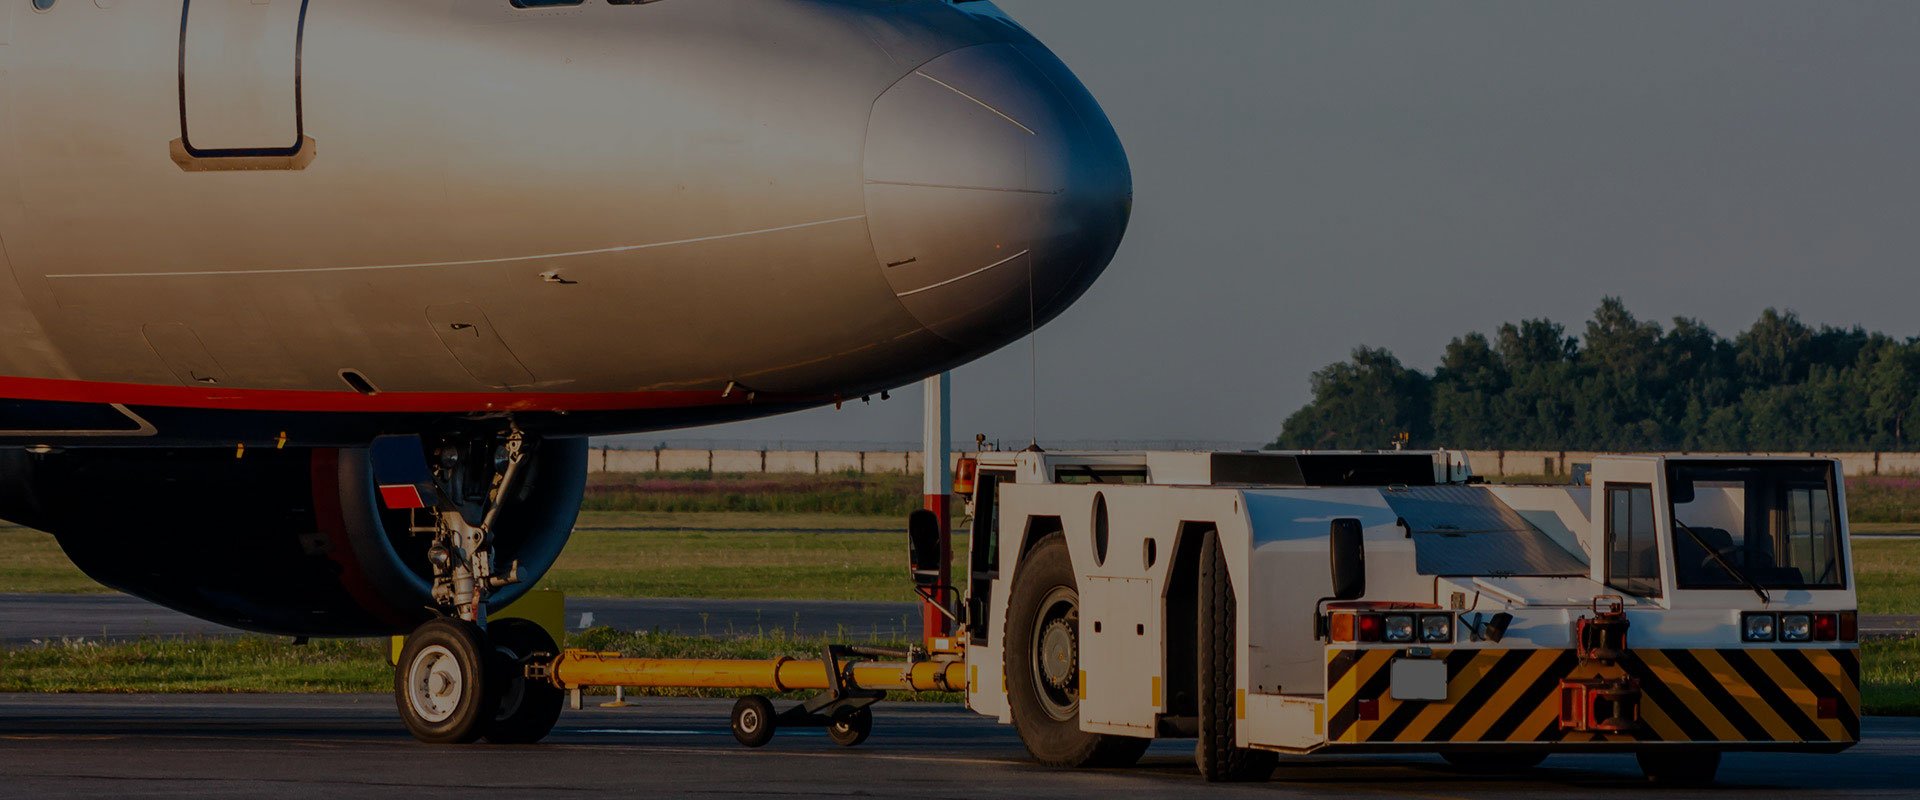 types-of-airport-ground-support-equipment